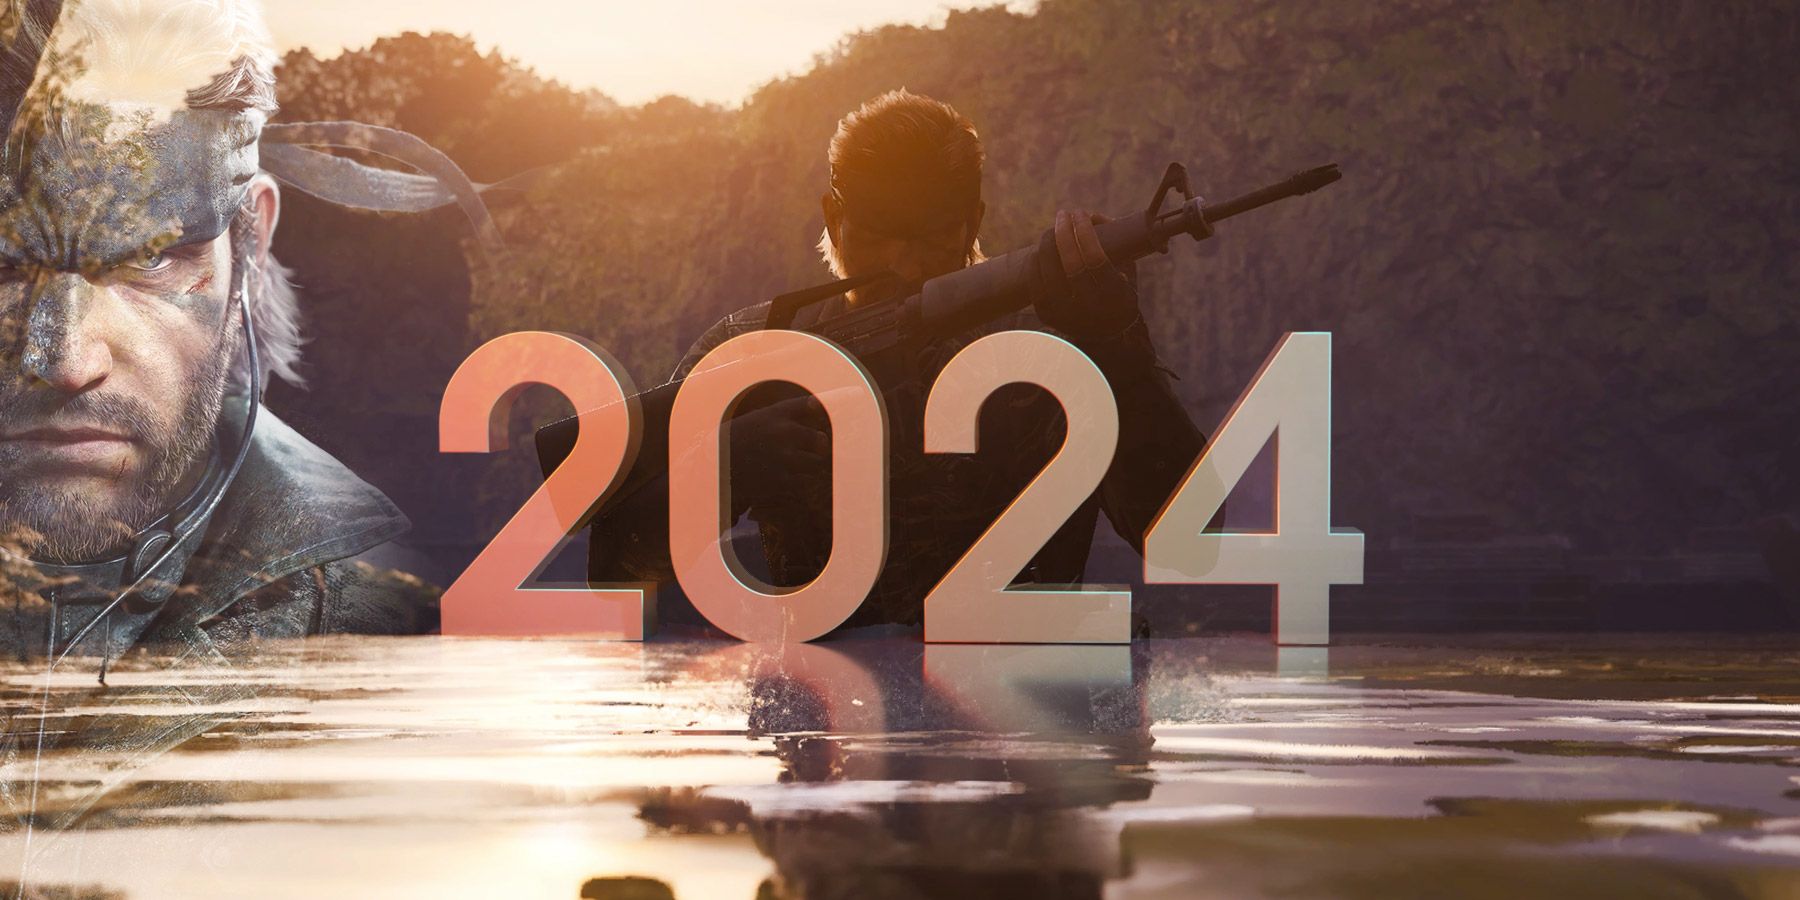 What to Expect From the Metal Gear Solid Franchise in 2024